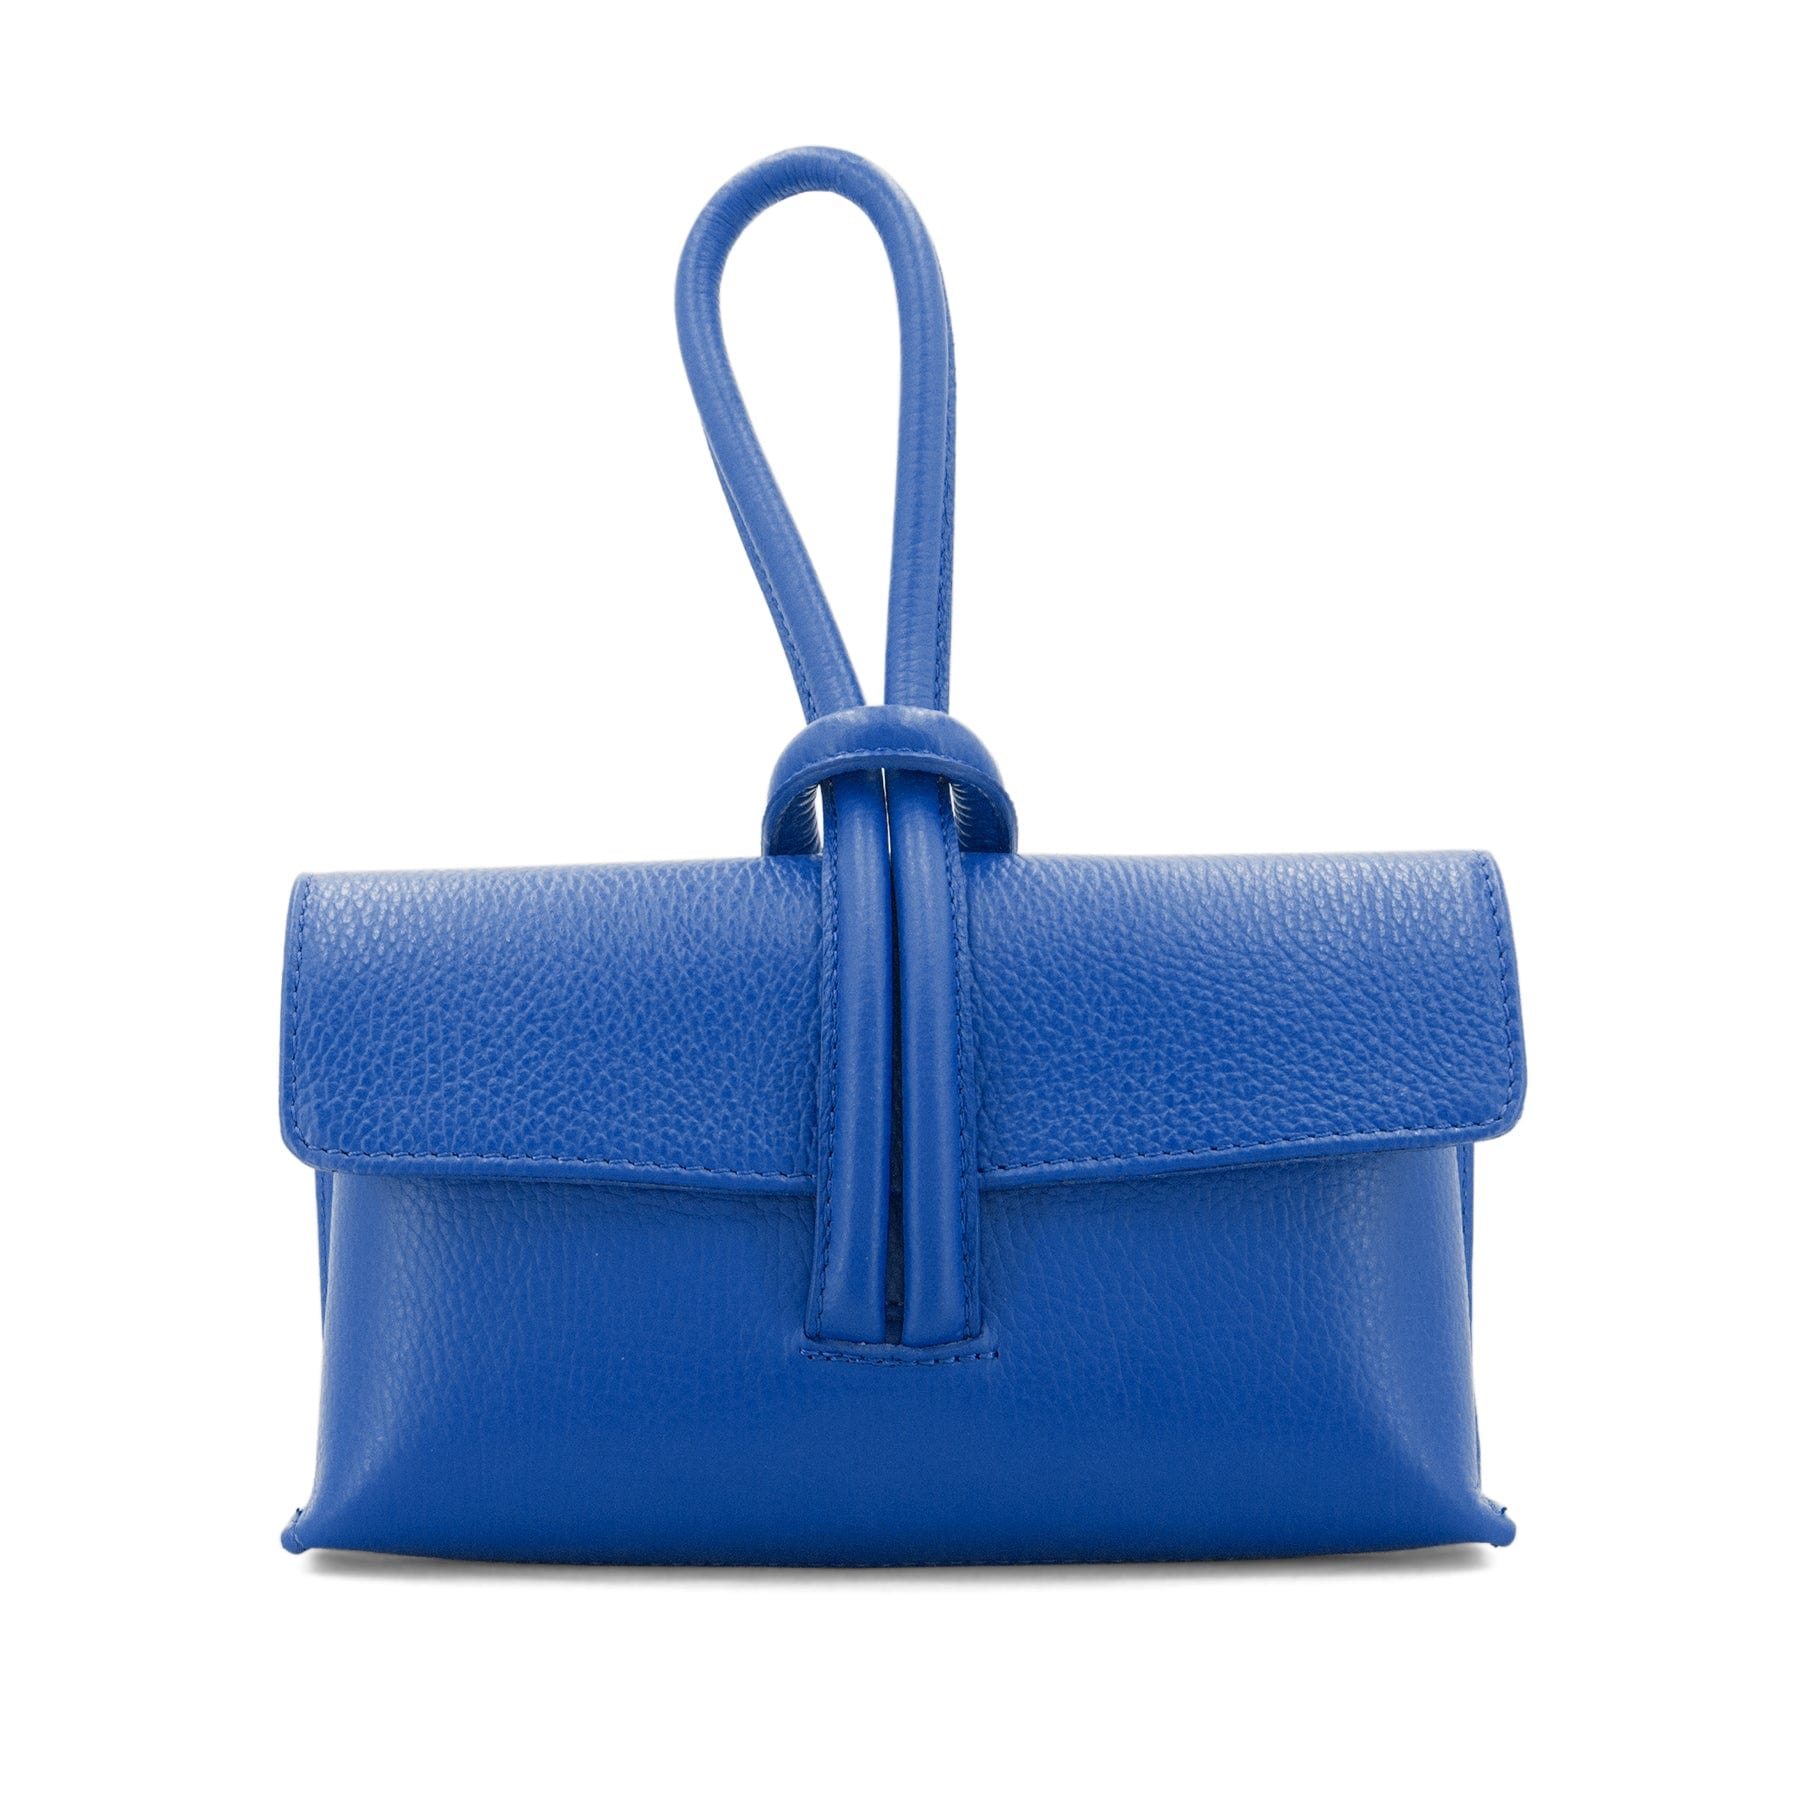 lusciousscarves Cobalt Blue Italian Leather Clutch Bag , Evening Bag with Loop Handle